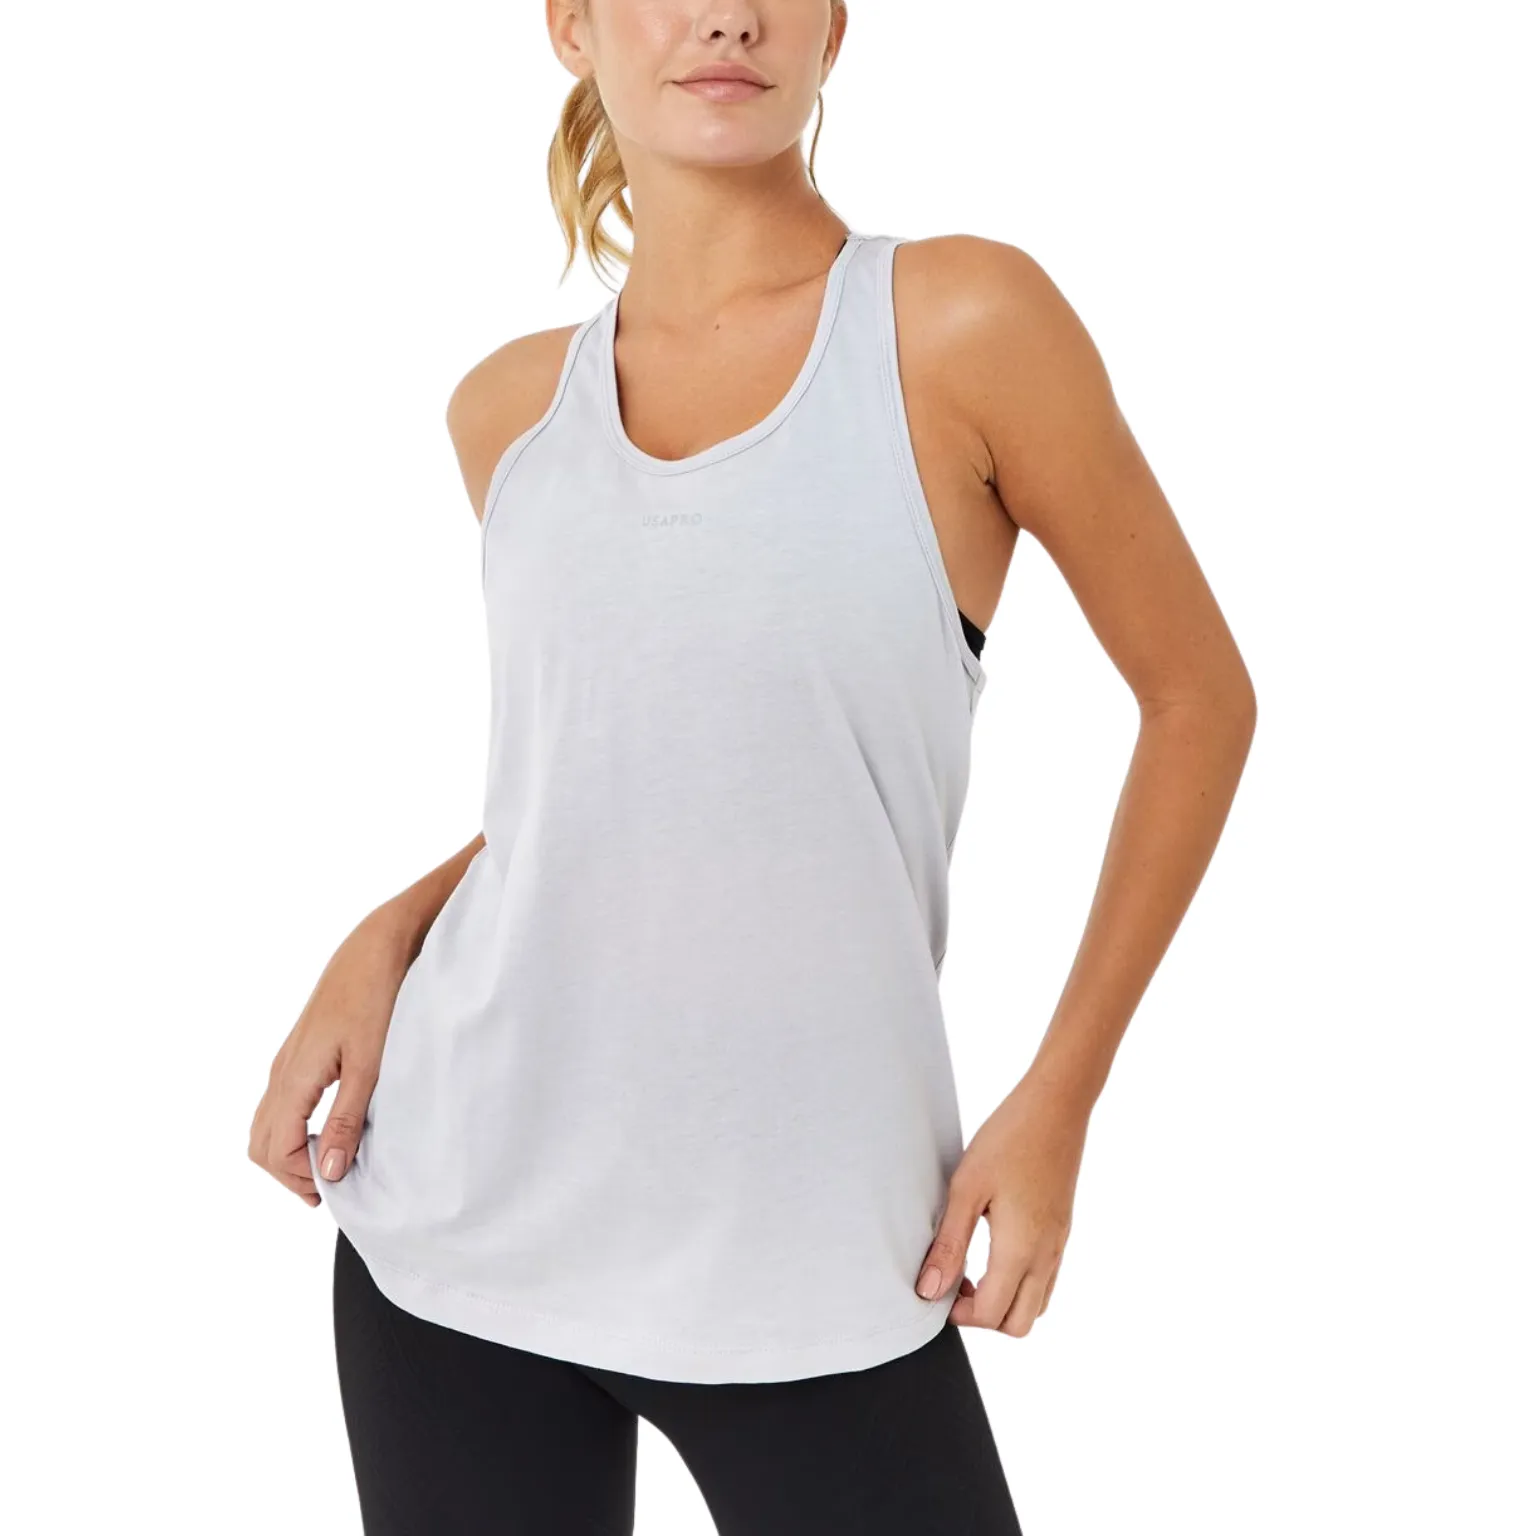 Gym Tank Top Manufacturing with superior quality